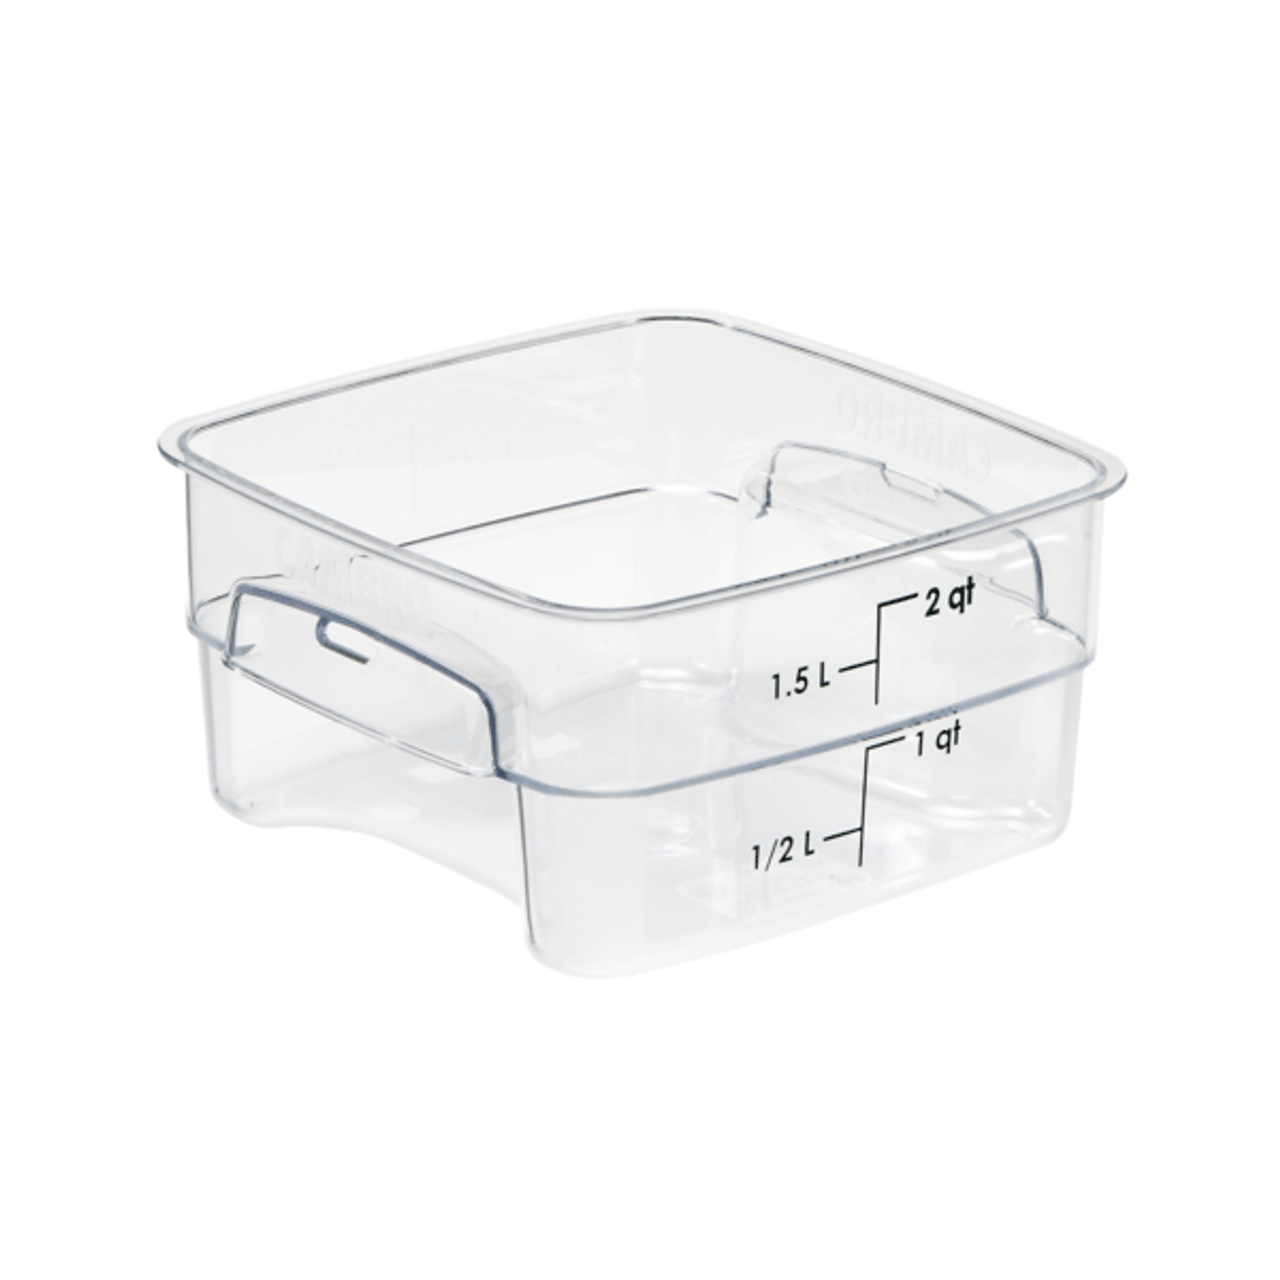 https://cdn11.bigcommerce.com/s-g3i86bef61/images/stencil/1280x1280/products/4503/4692/Cambro-2SFSPROCW135-FreshPro-2qt__38578.1680727398.png?c=1